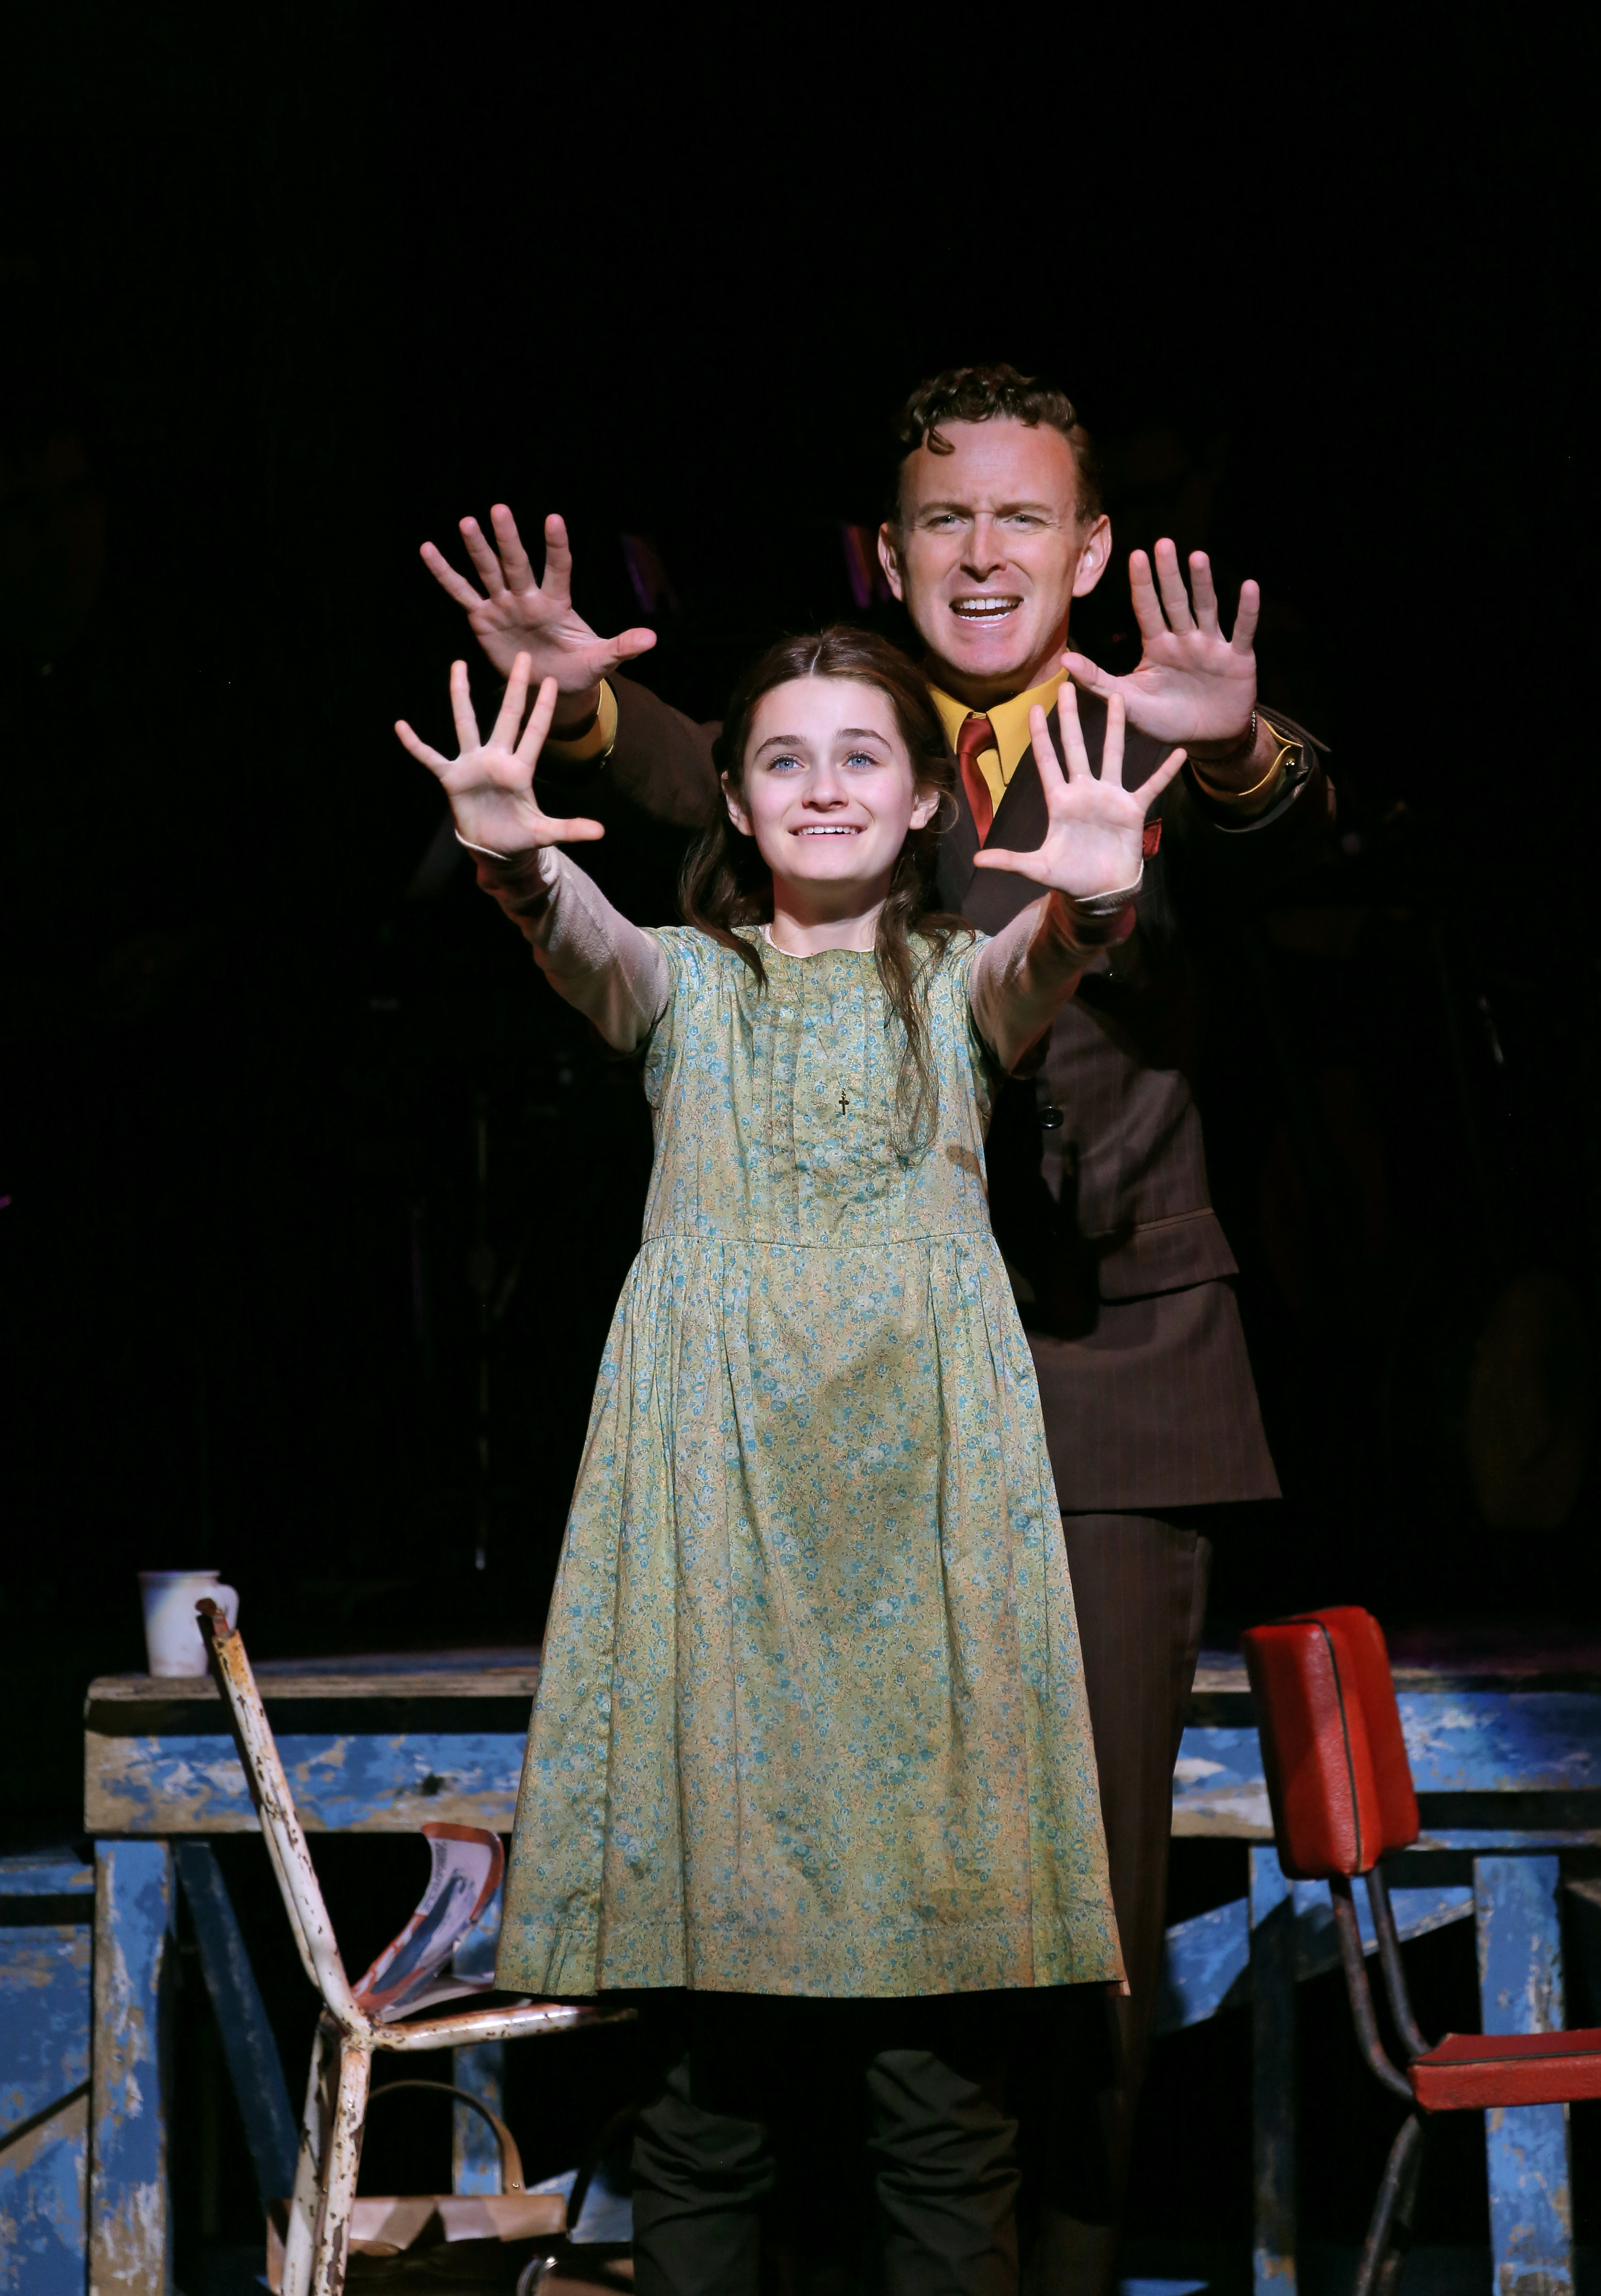 Emerson as Young Violet in Violet on Broadway